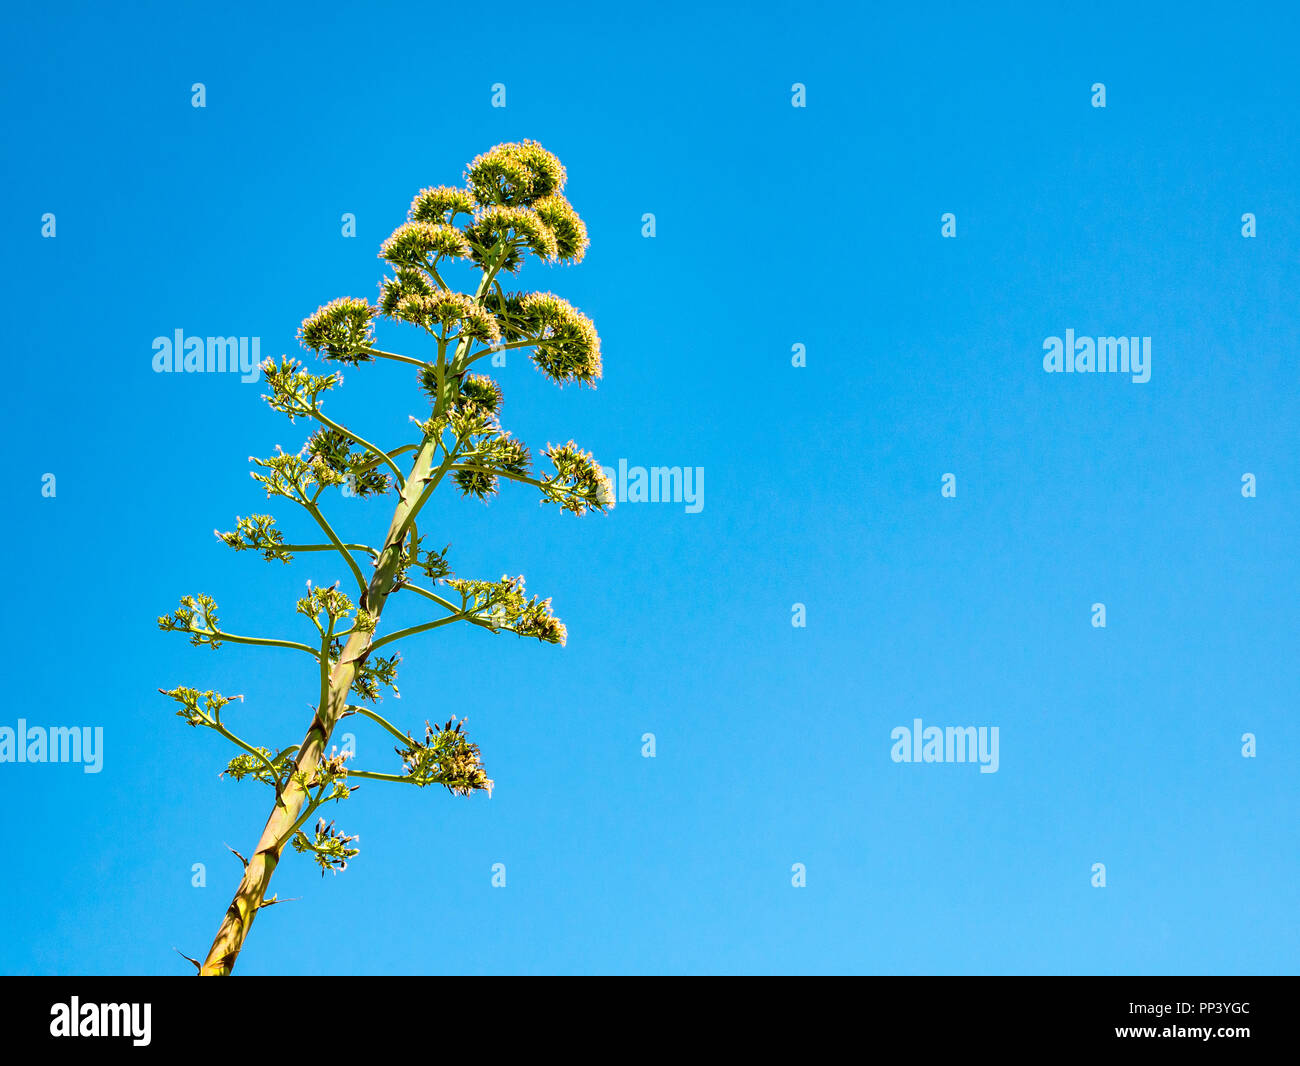 Tall agave flower spike plant against blue sky, Sedella, Axarquia, Andalusia, Spain Stock Photo